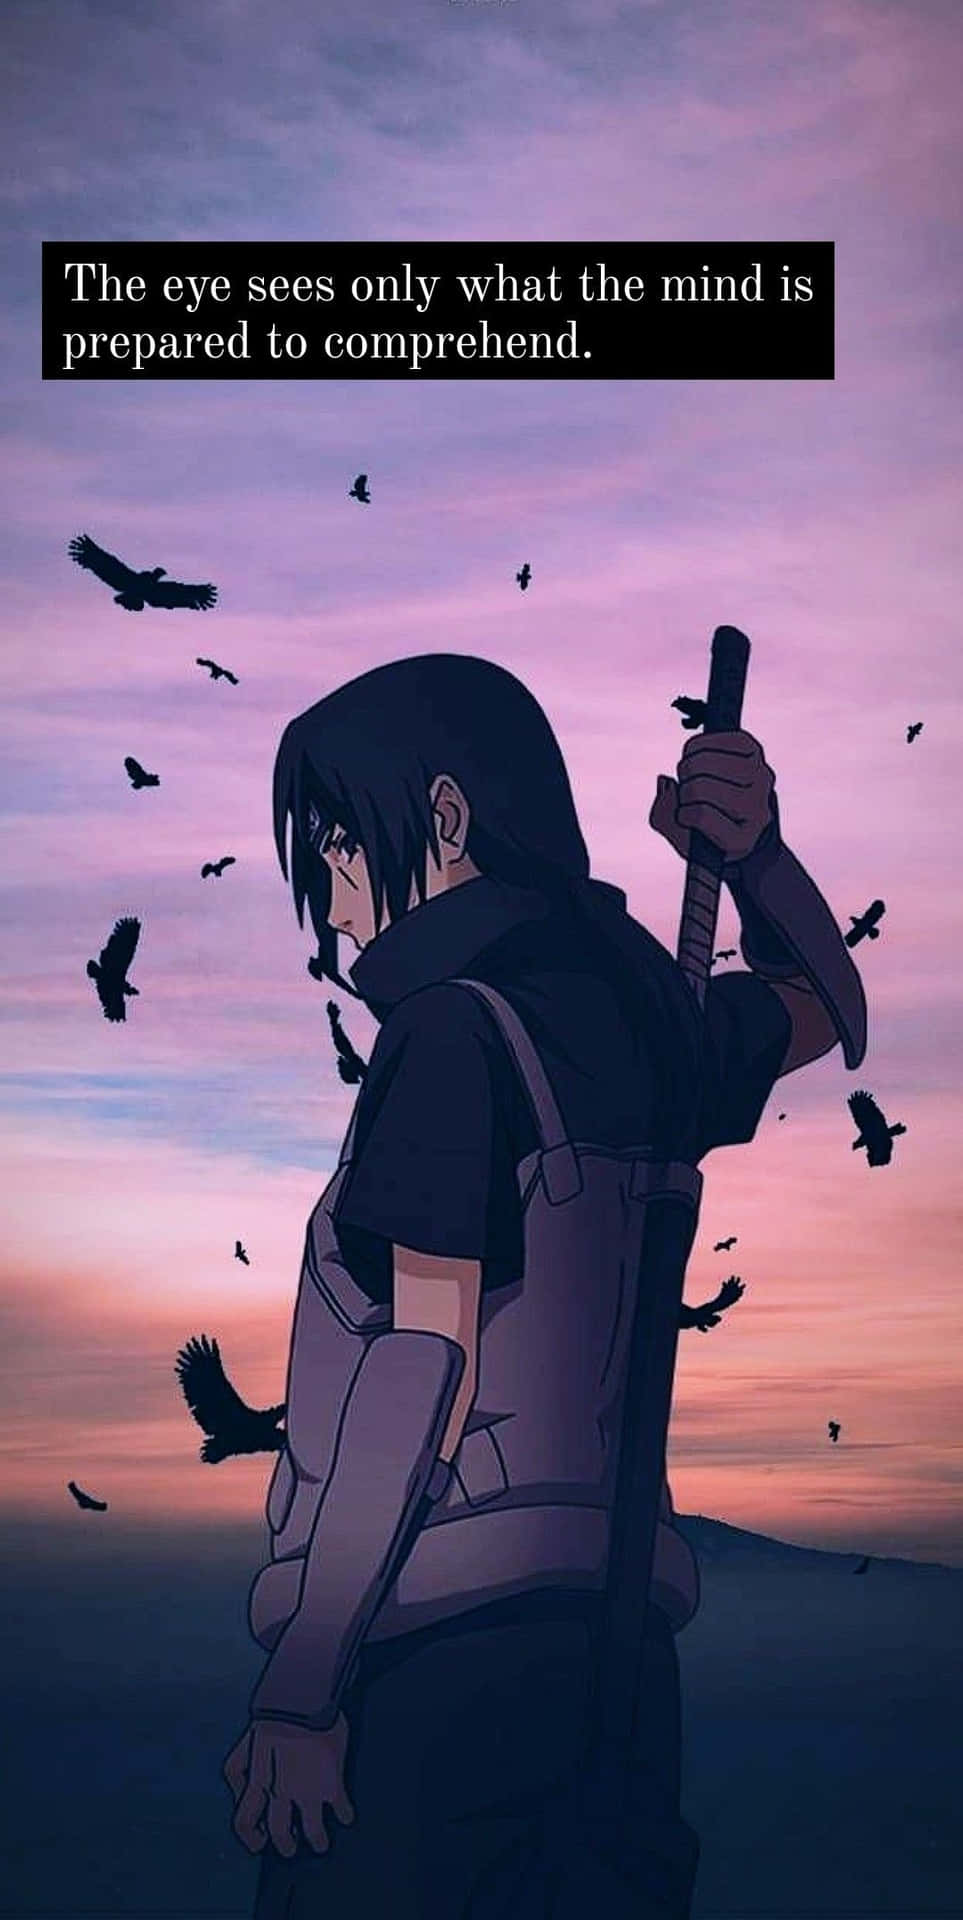 The world will eventually end, but our ambition will never be extinguished." - Akatsuki Wallpaper